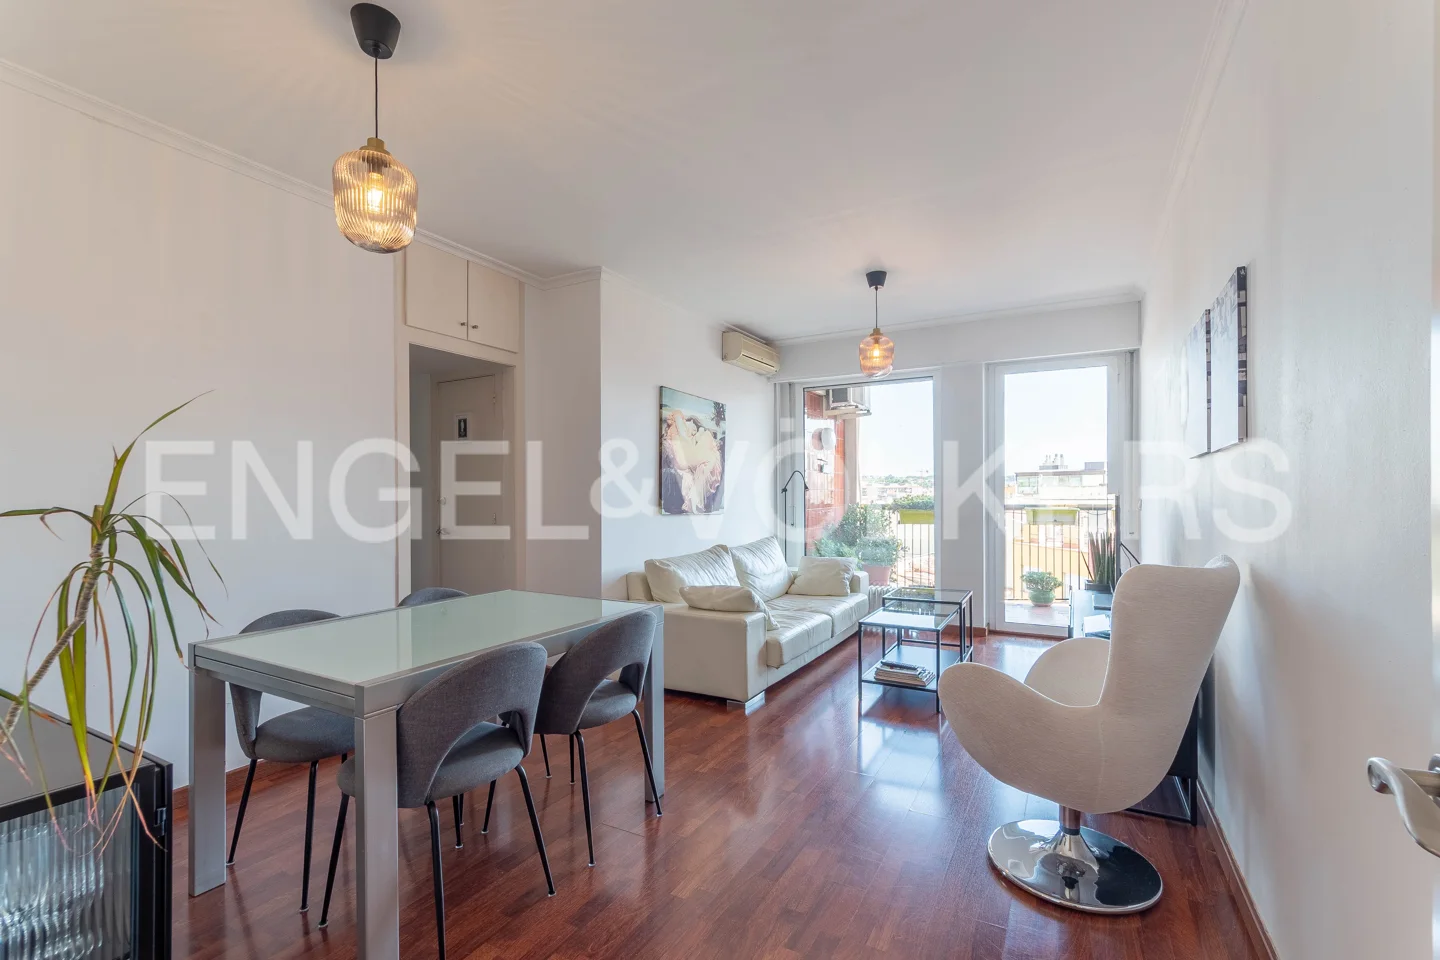 Flat with terrace and well oriented in the Eixample of Girona.